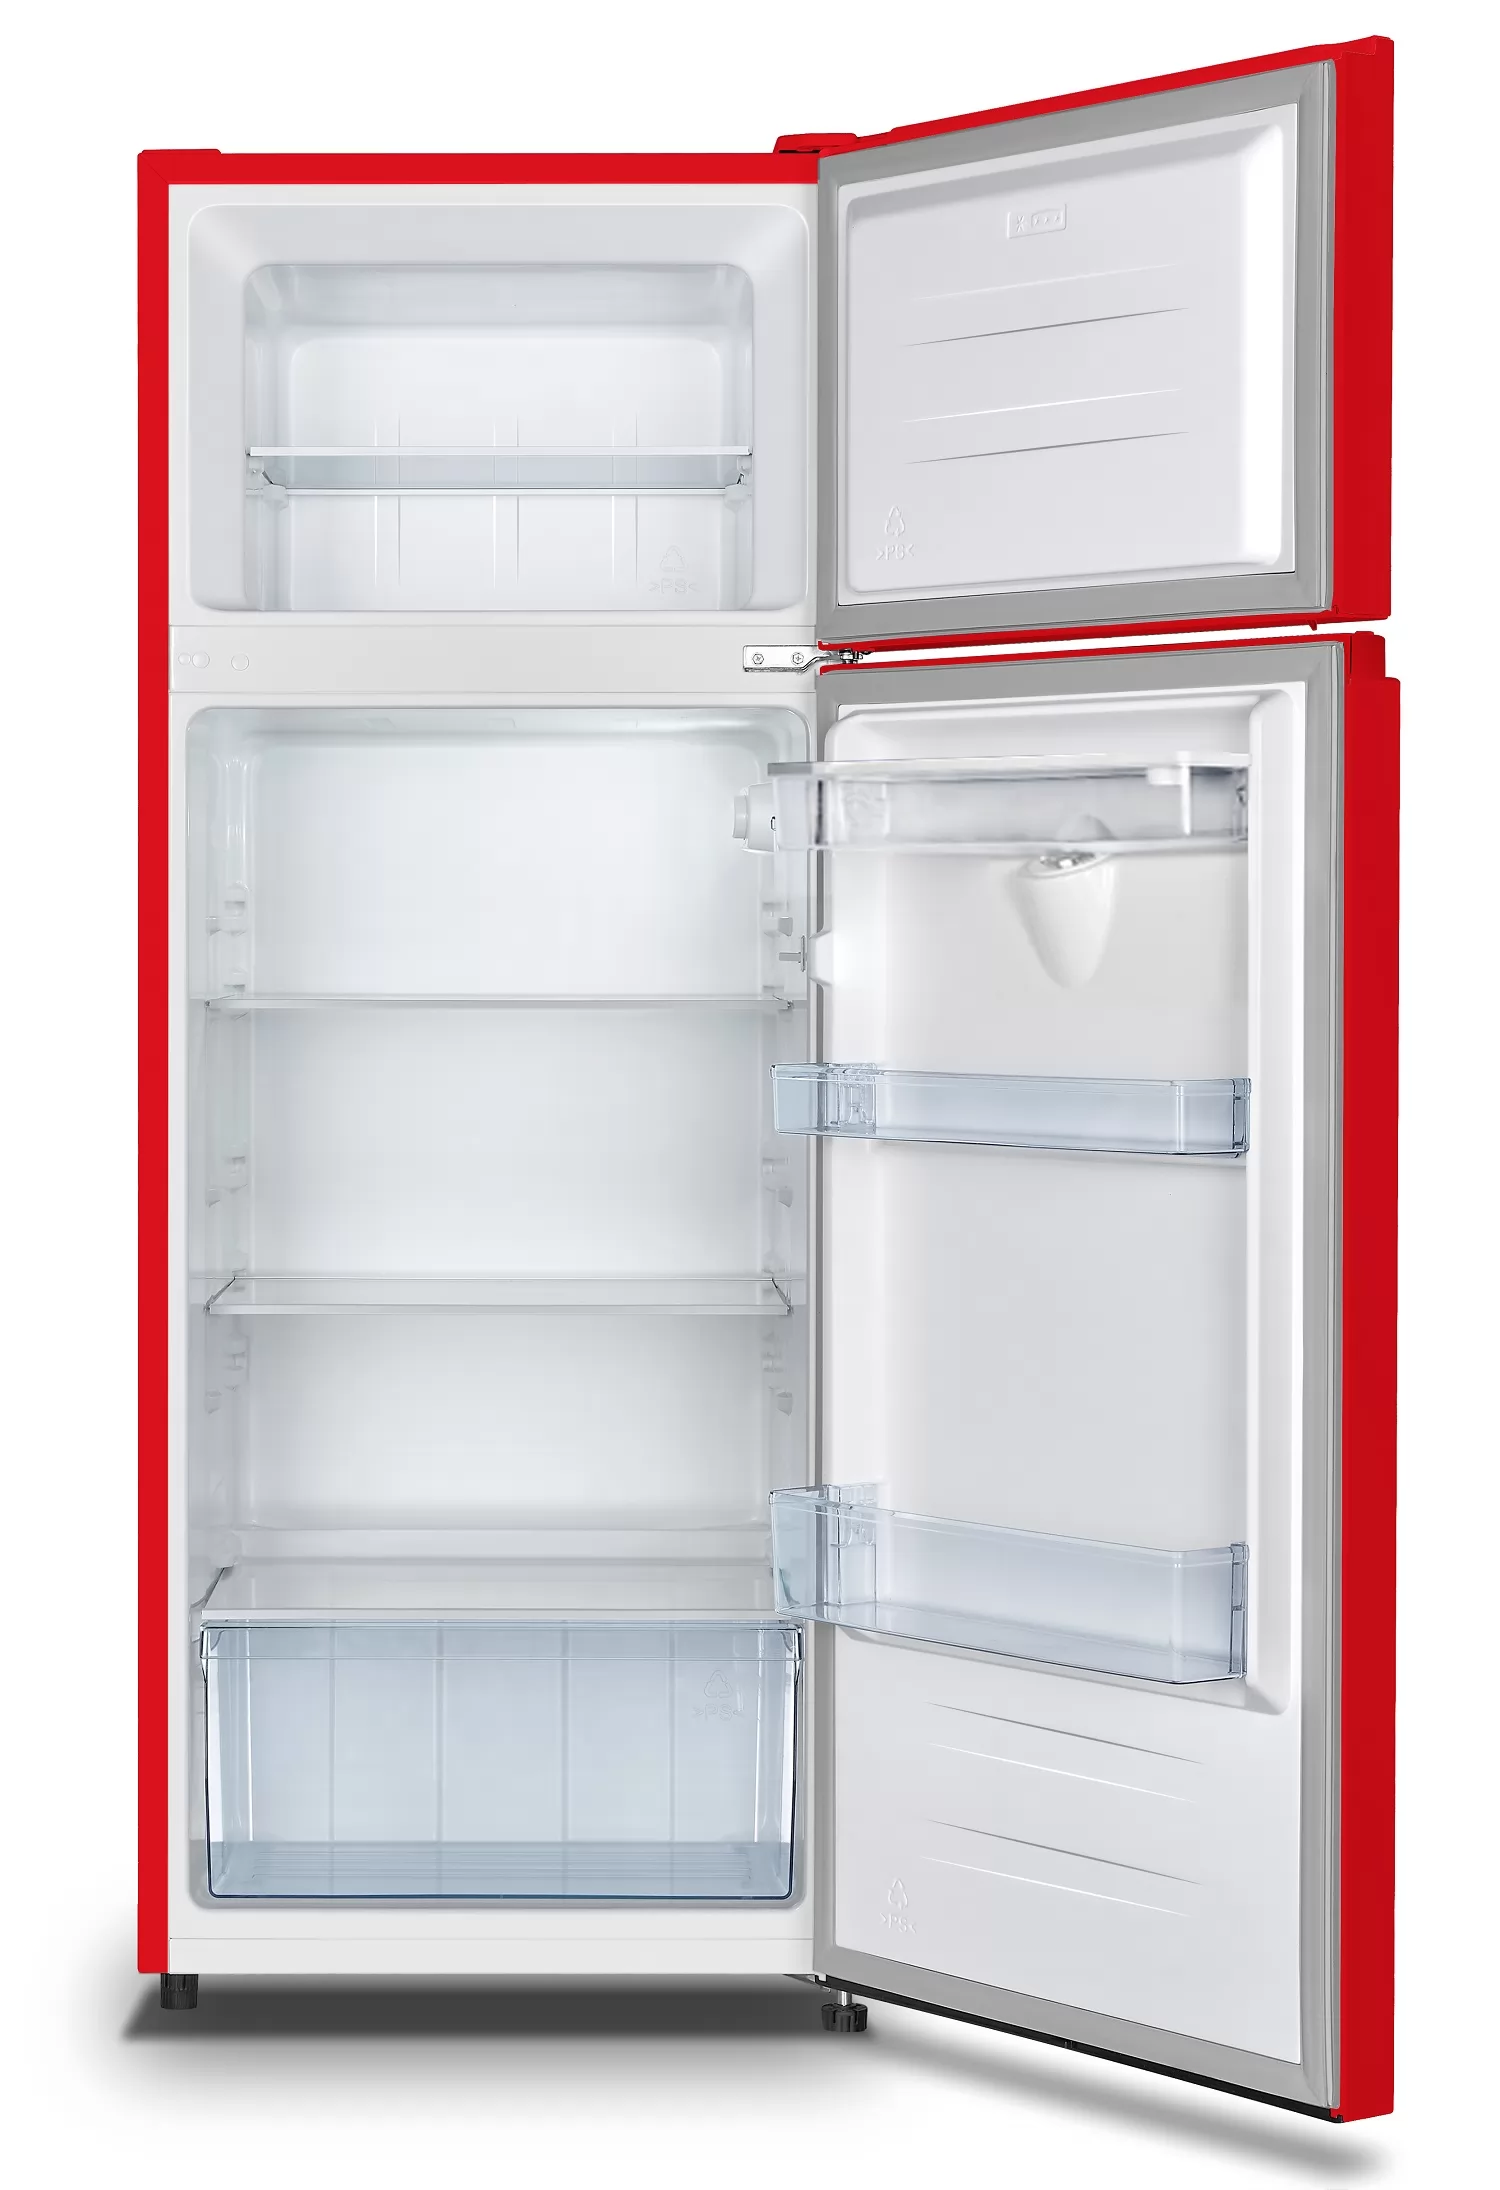 HISENSE REFRIGERATOR REF 205DRB (RED COLOUR) WITH WATER DISPENSER R600 GAS